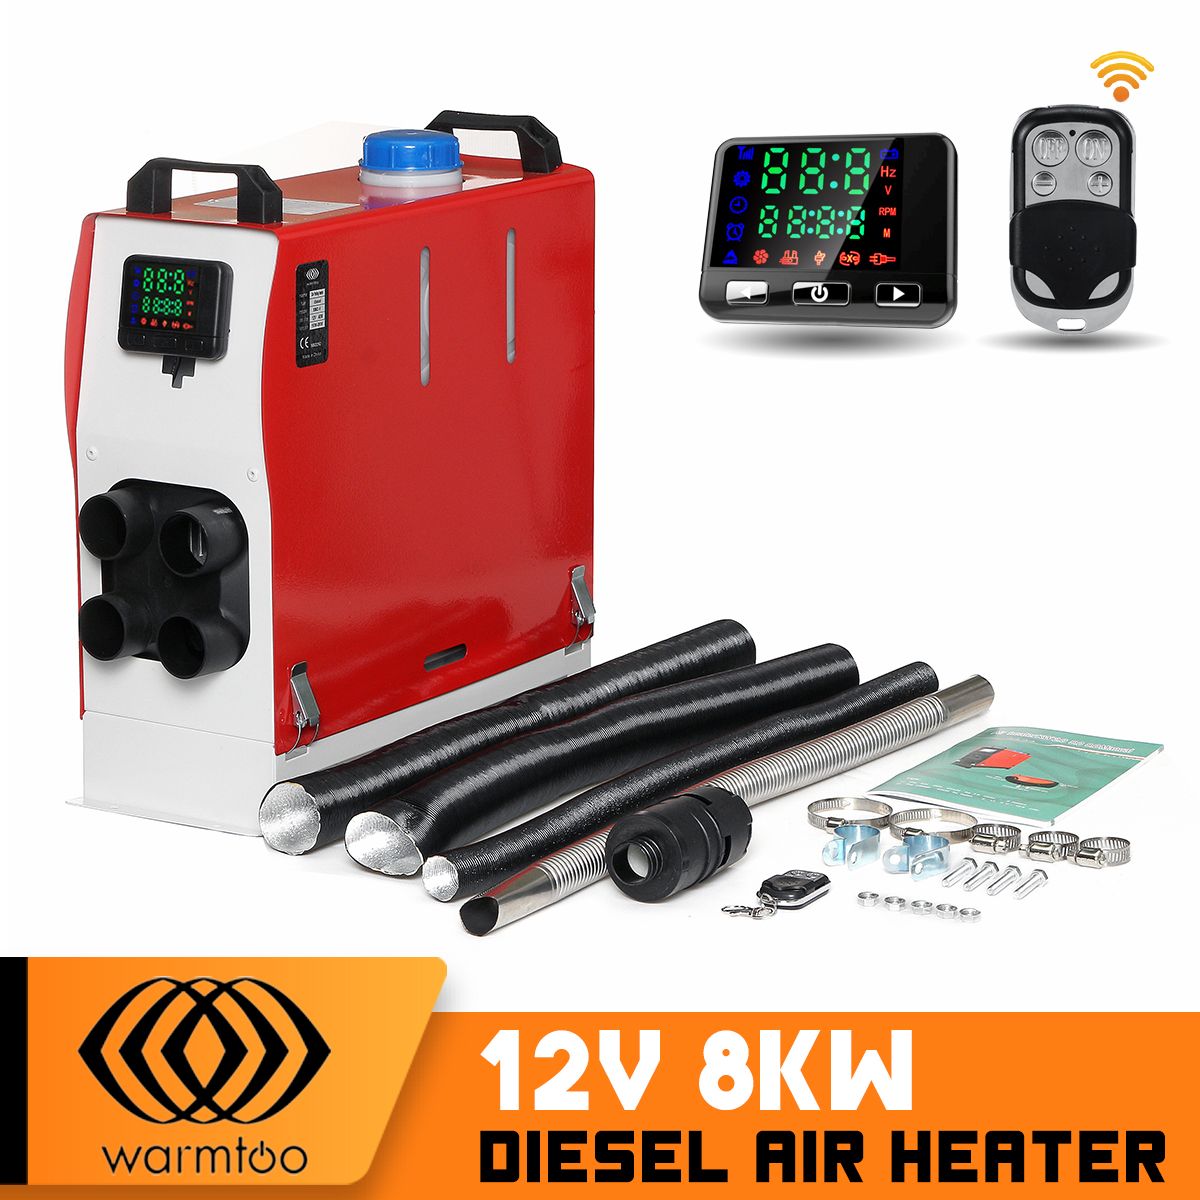 WARMTOOL-All-In-One-12V-8KW-Car-Parking-Heater-Diesel-Air-Heater-with-LCD-Thermostat-Remote-Control-1640157